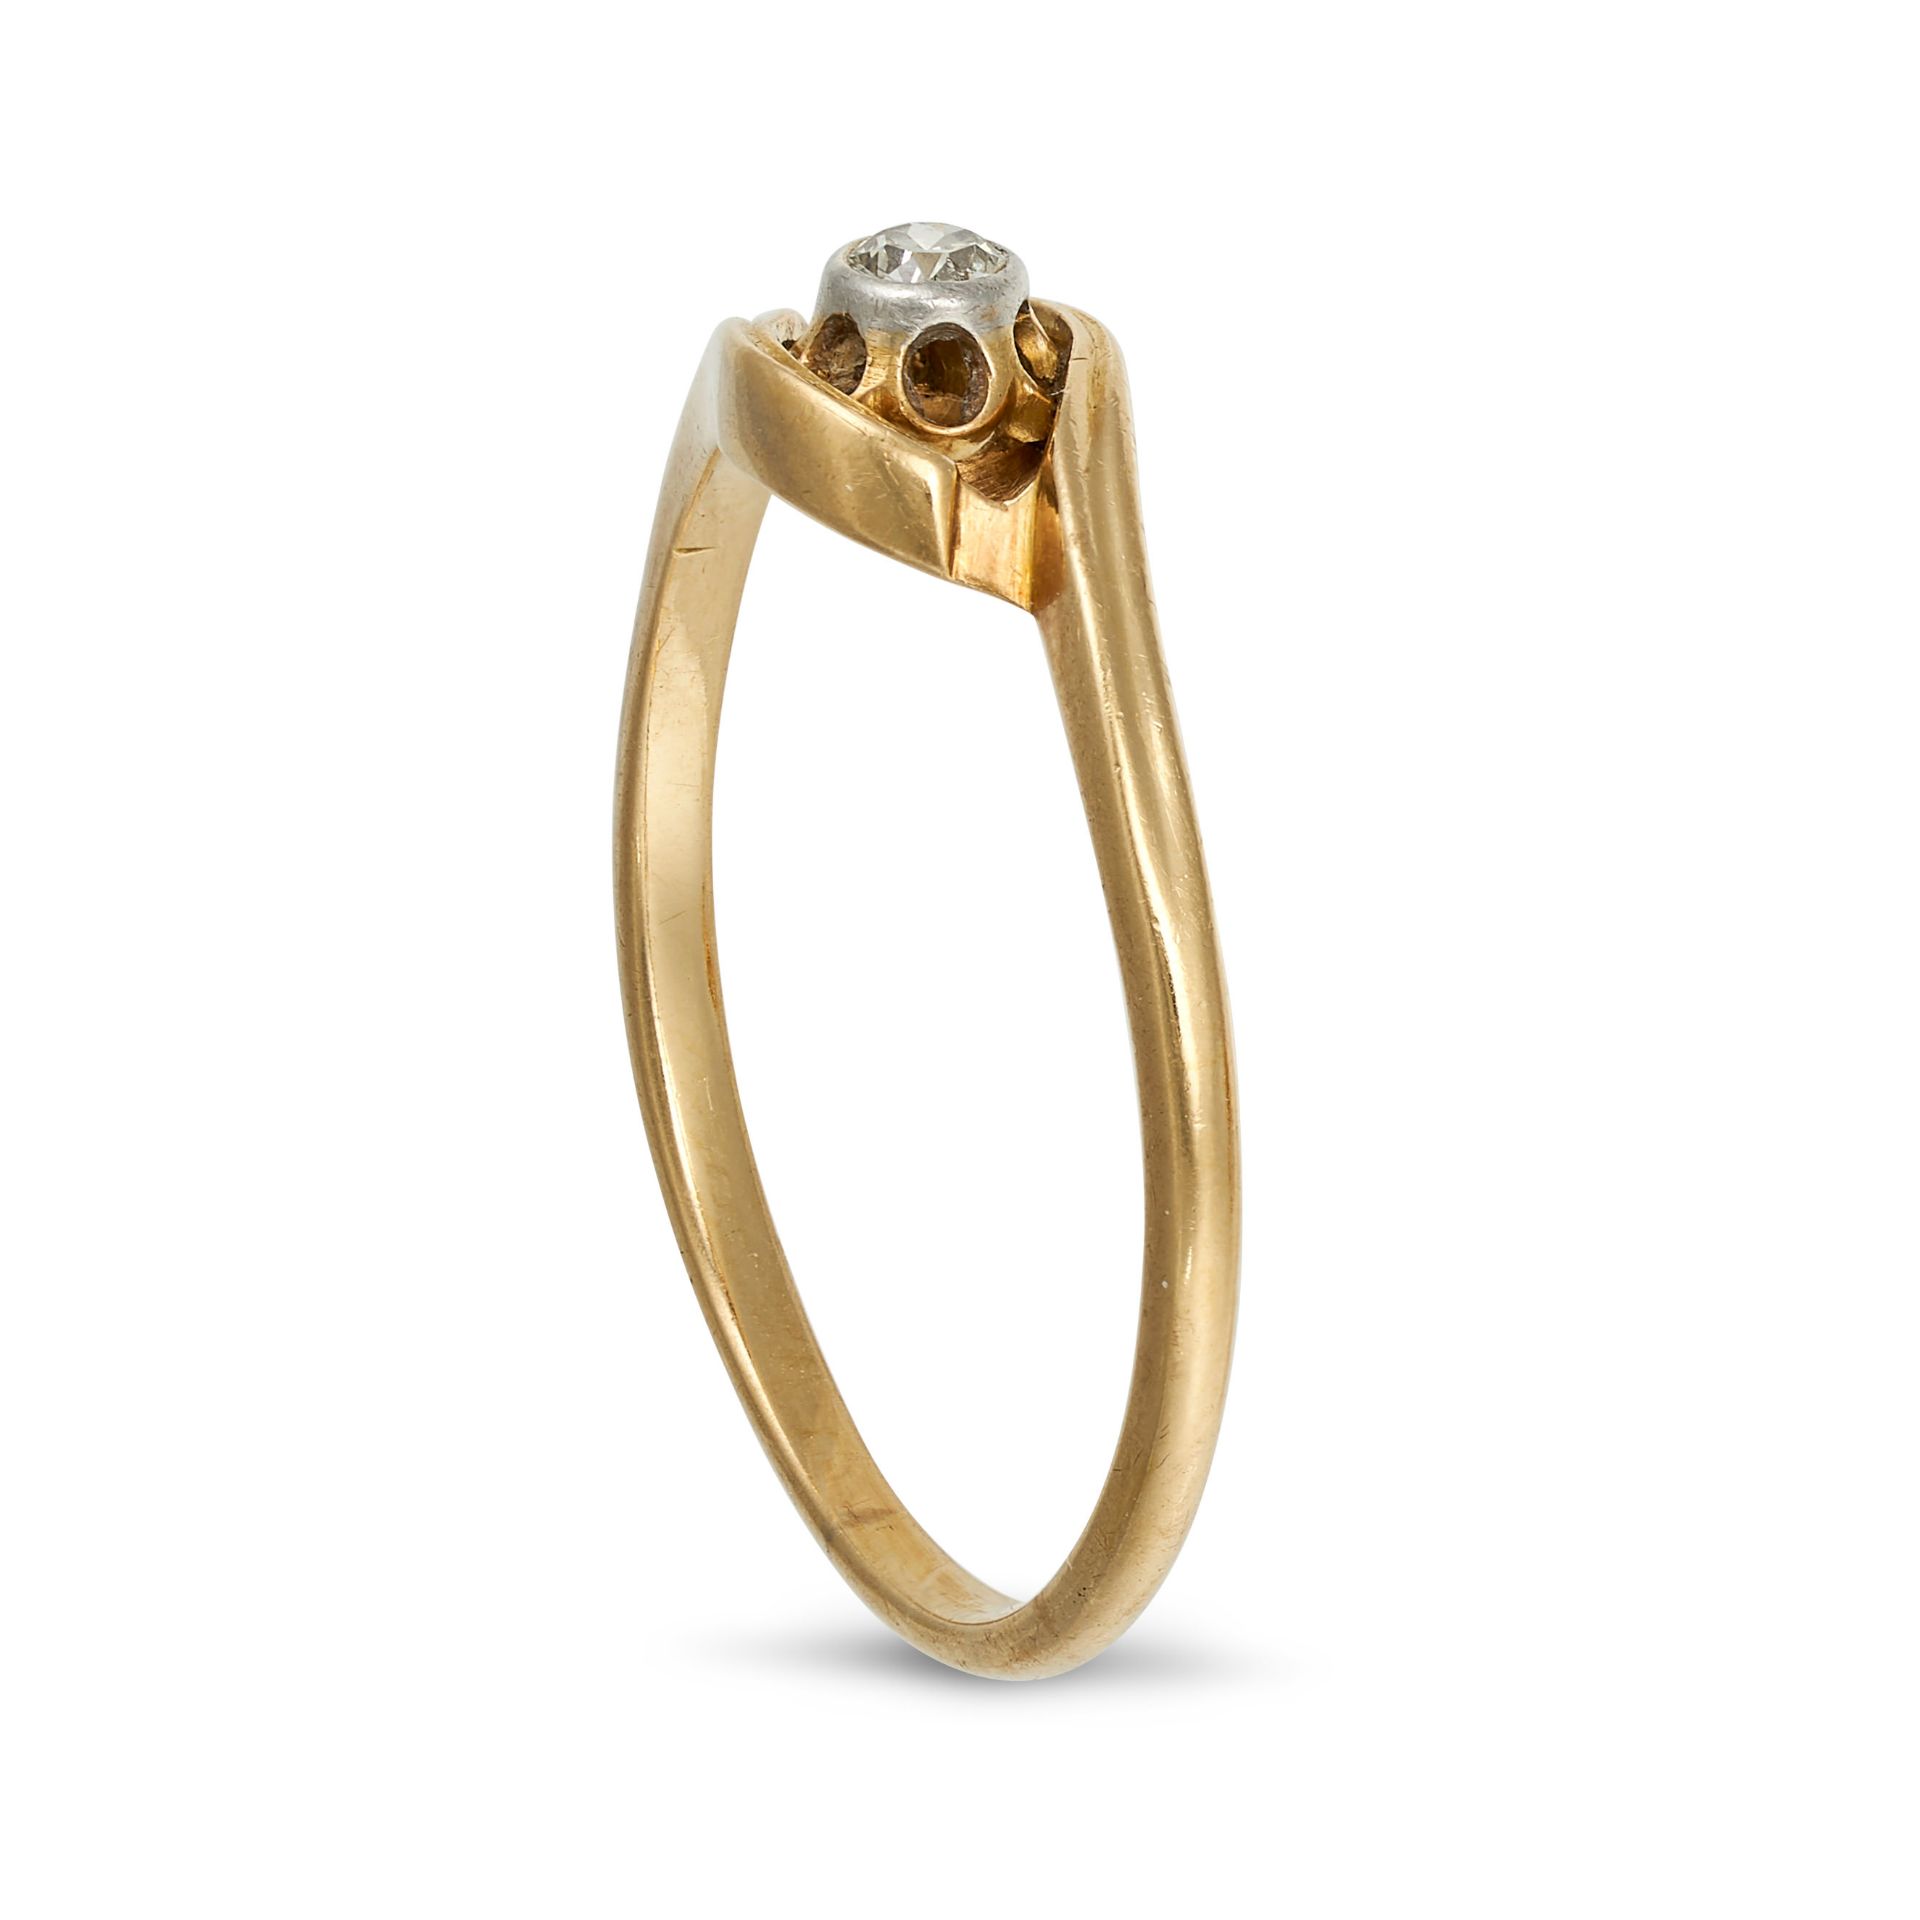 A VINTAGE SOLITAIRE DIAMOND RING in 18ct yellow gold, set with an old cut diamond, stamped 18CT, ... - Image 2 of 2